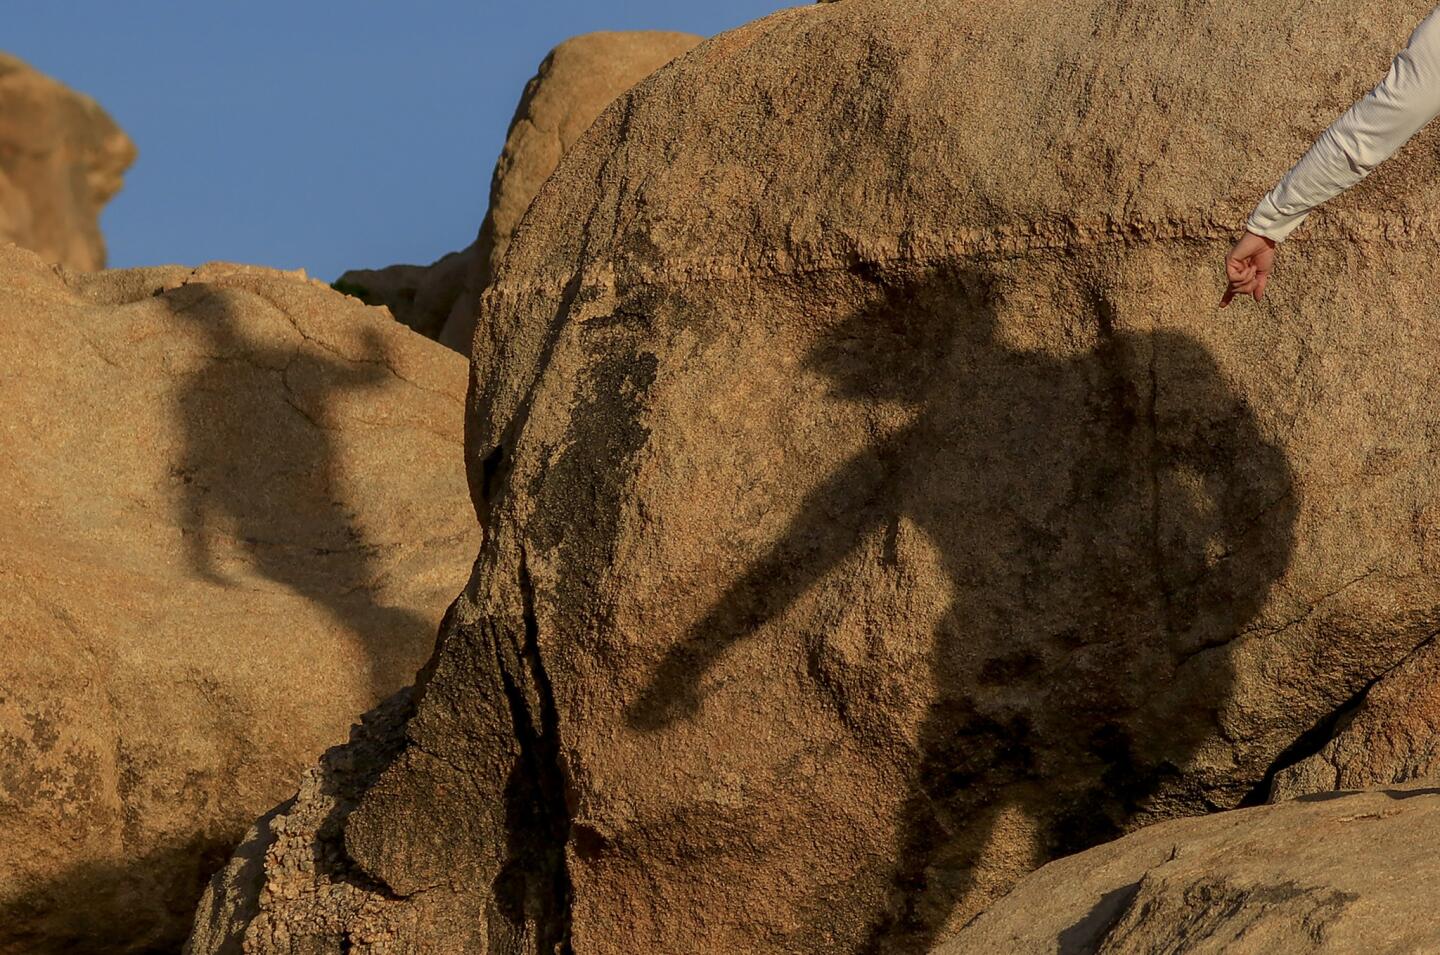 The climbers' shadows are cast on the boulders at "Trash Can Rock" at sunset in Joshua Tree National Park.